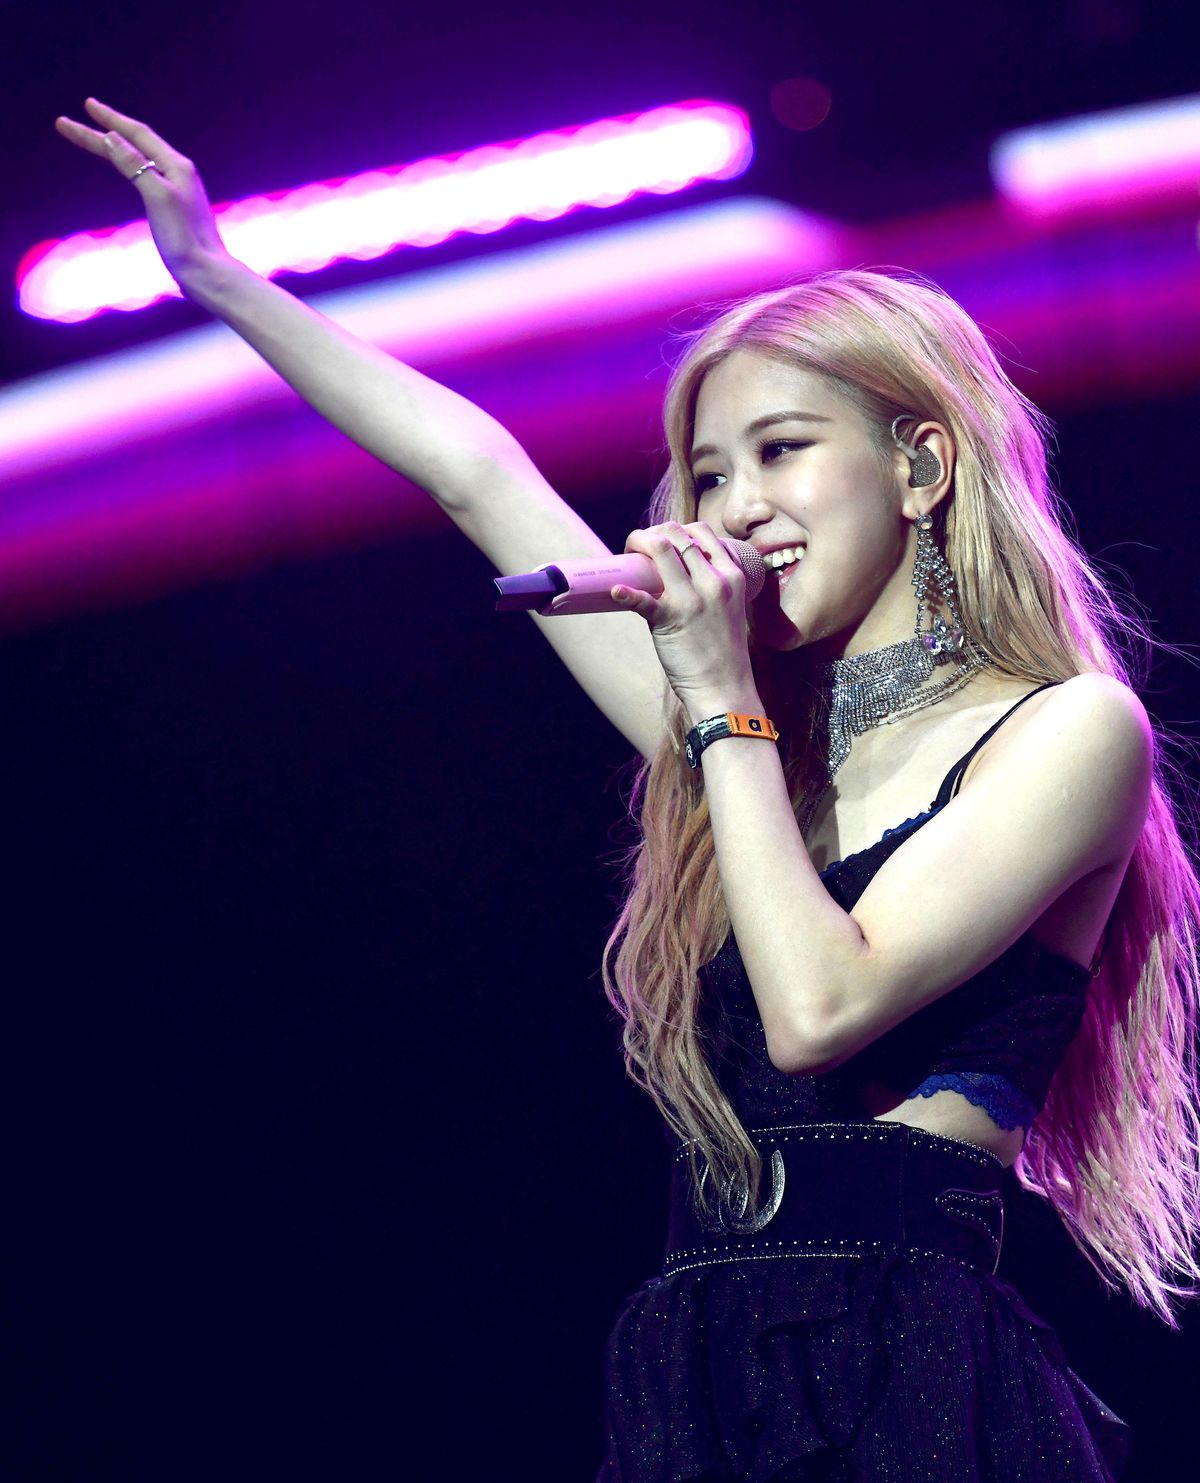 Rosé Joins BTS As The Second-Ever Korean Musician To Hit No. 1 On Billboard’s Global Chart